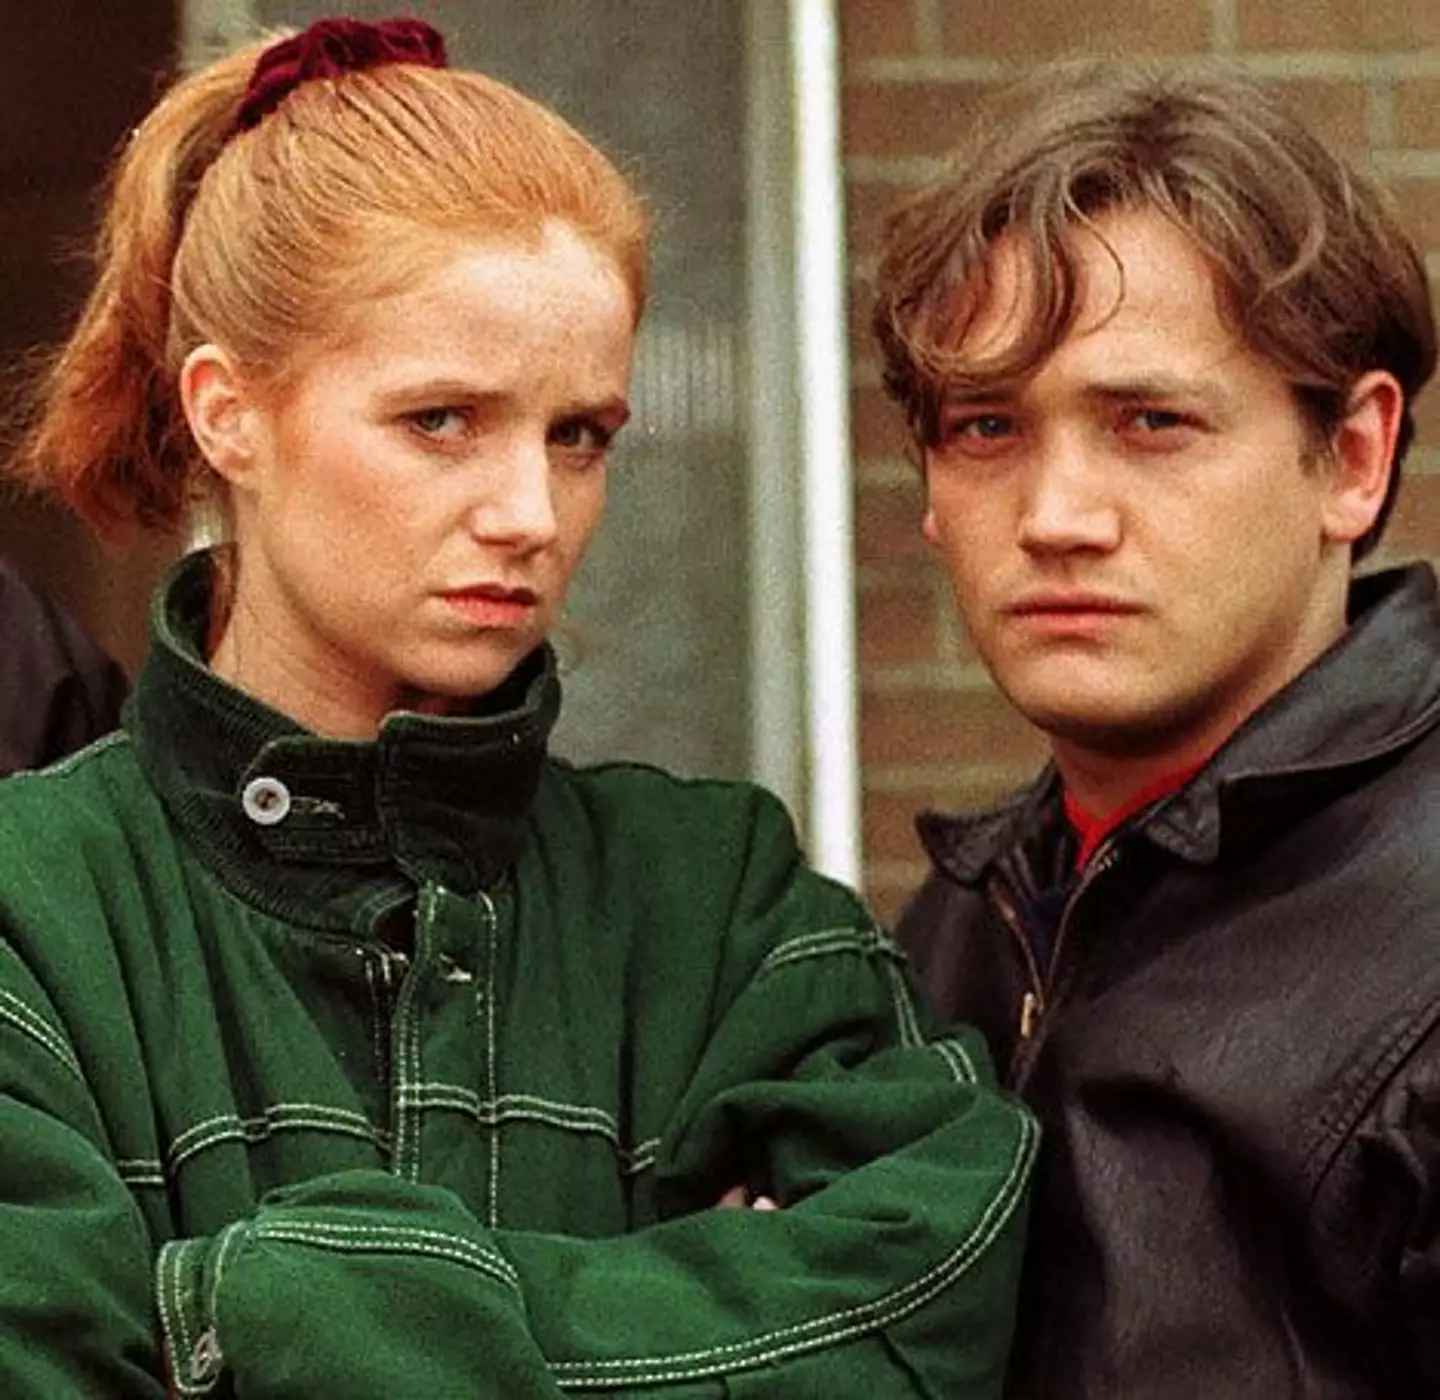 Patsy Palmer and Sid Owen as Bianca and Ricky.